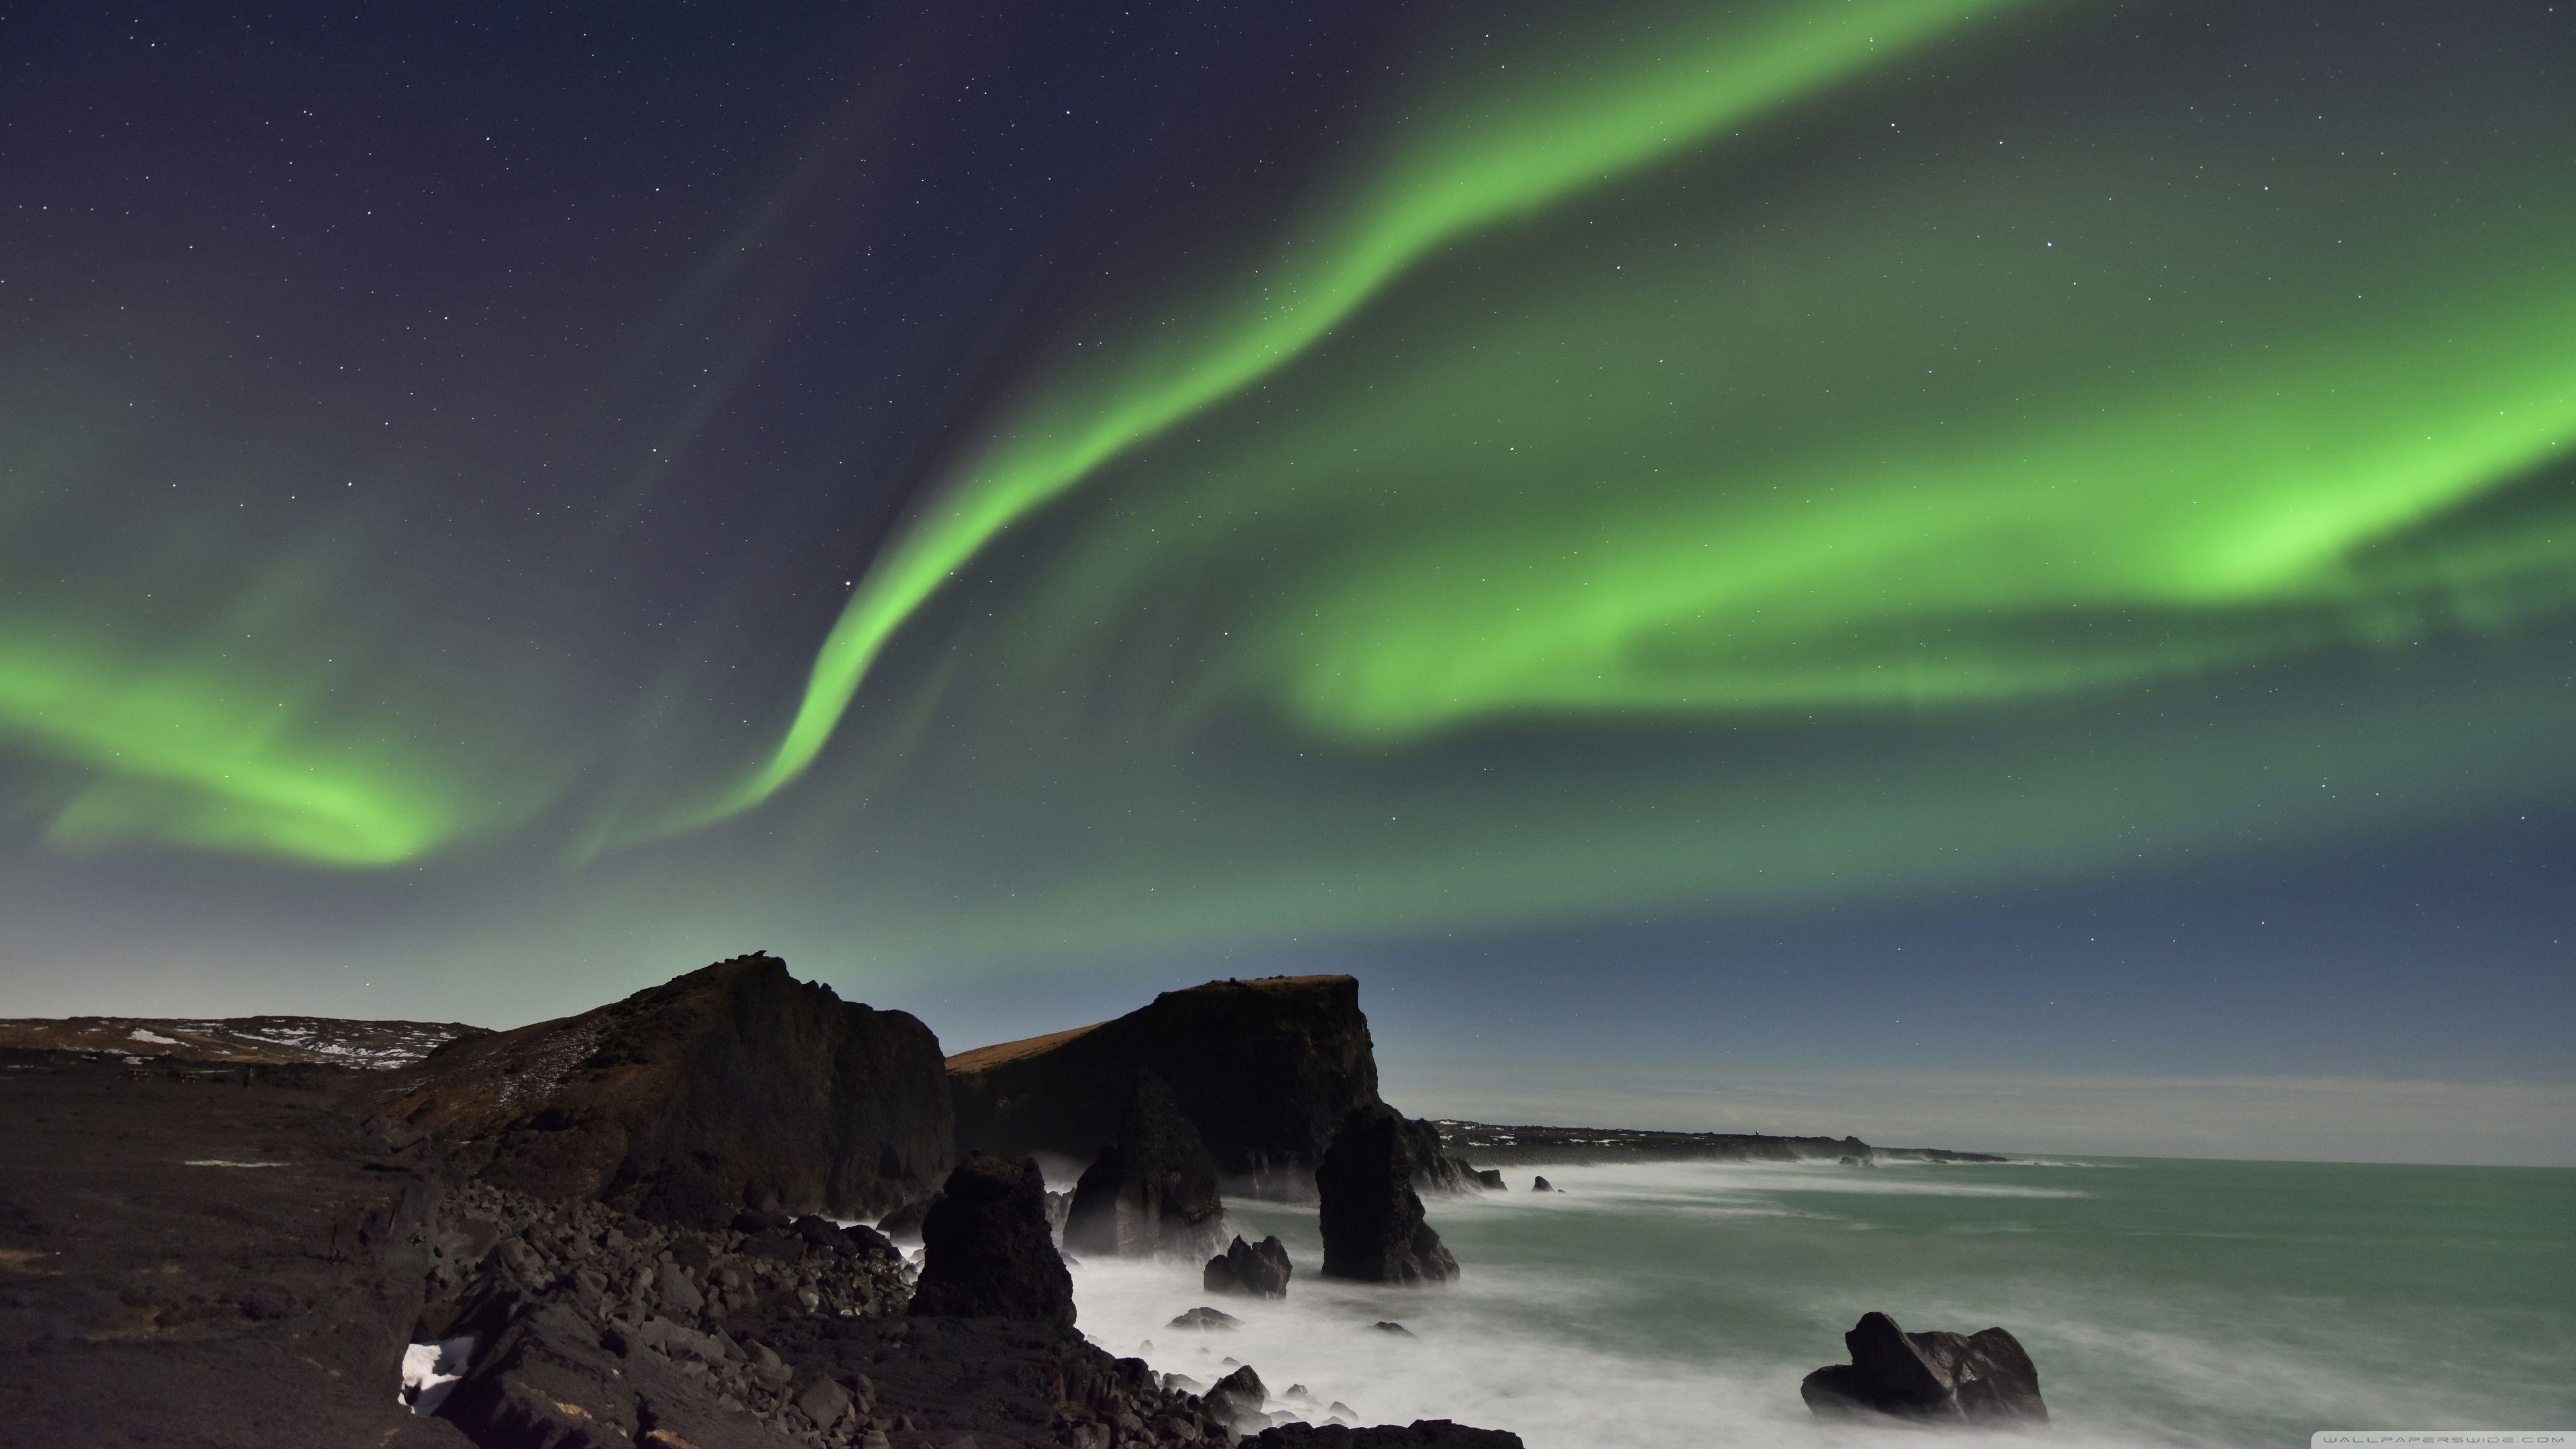 Iceland Northern Lights 4k Wallpapers Top Free Iceland Northern